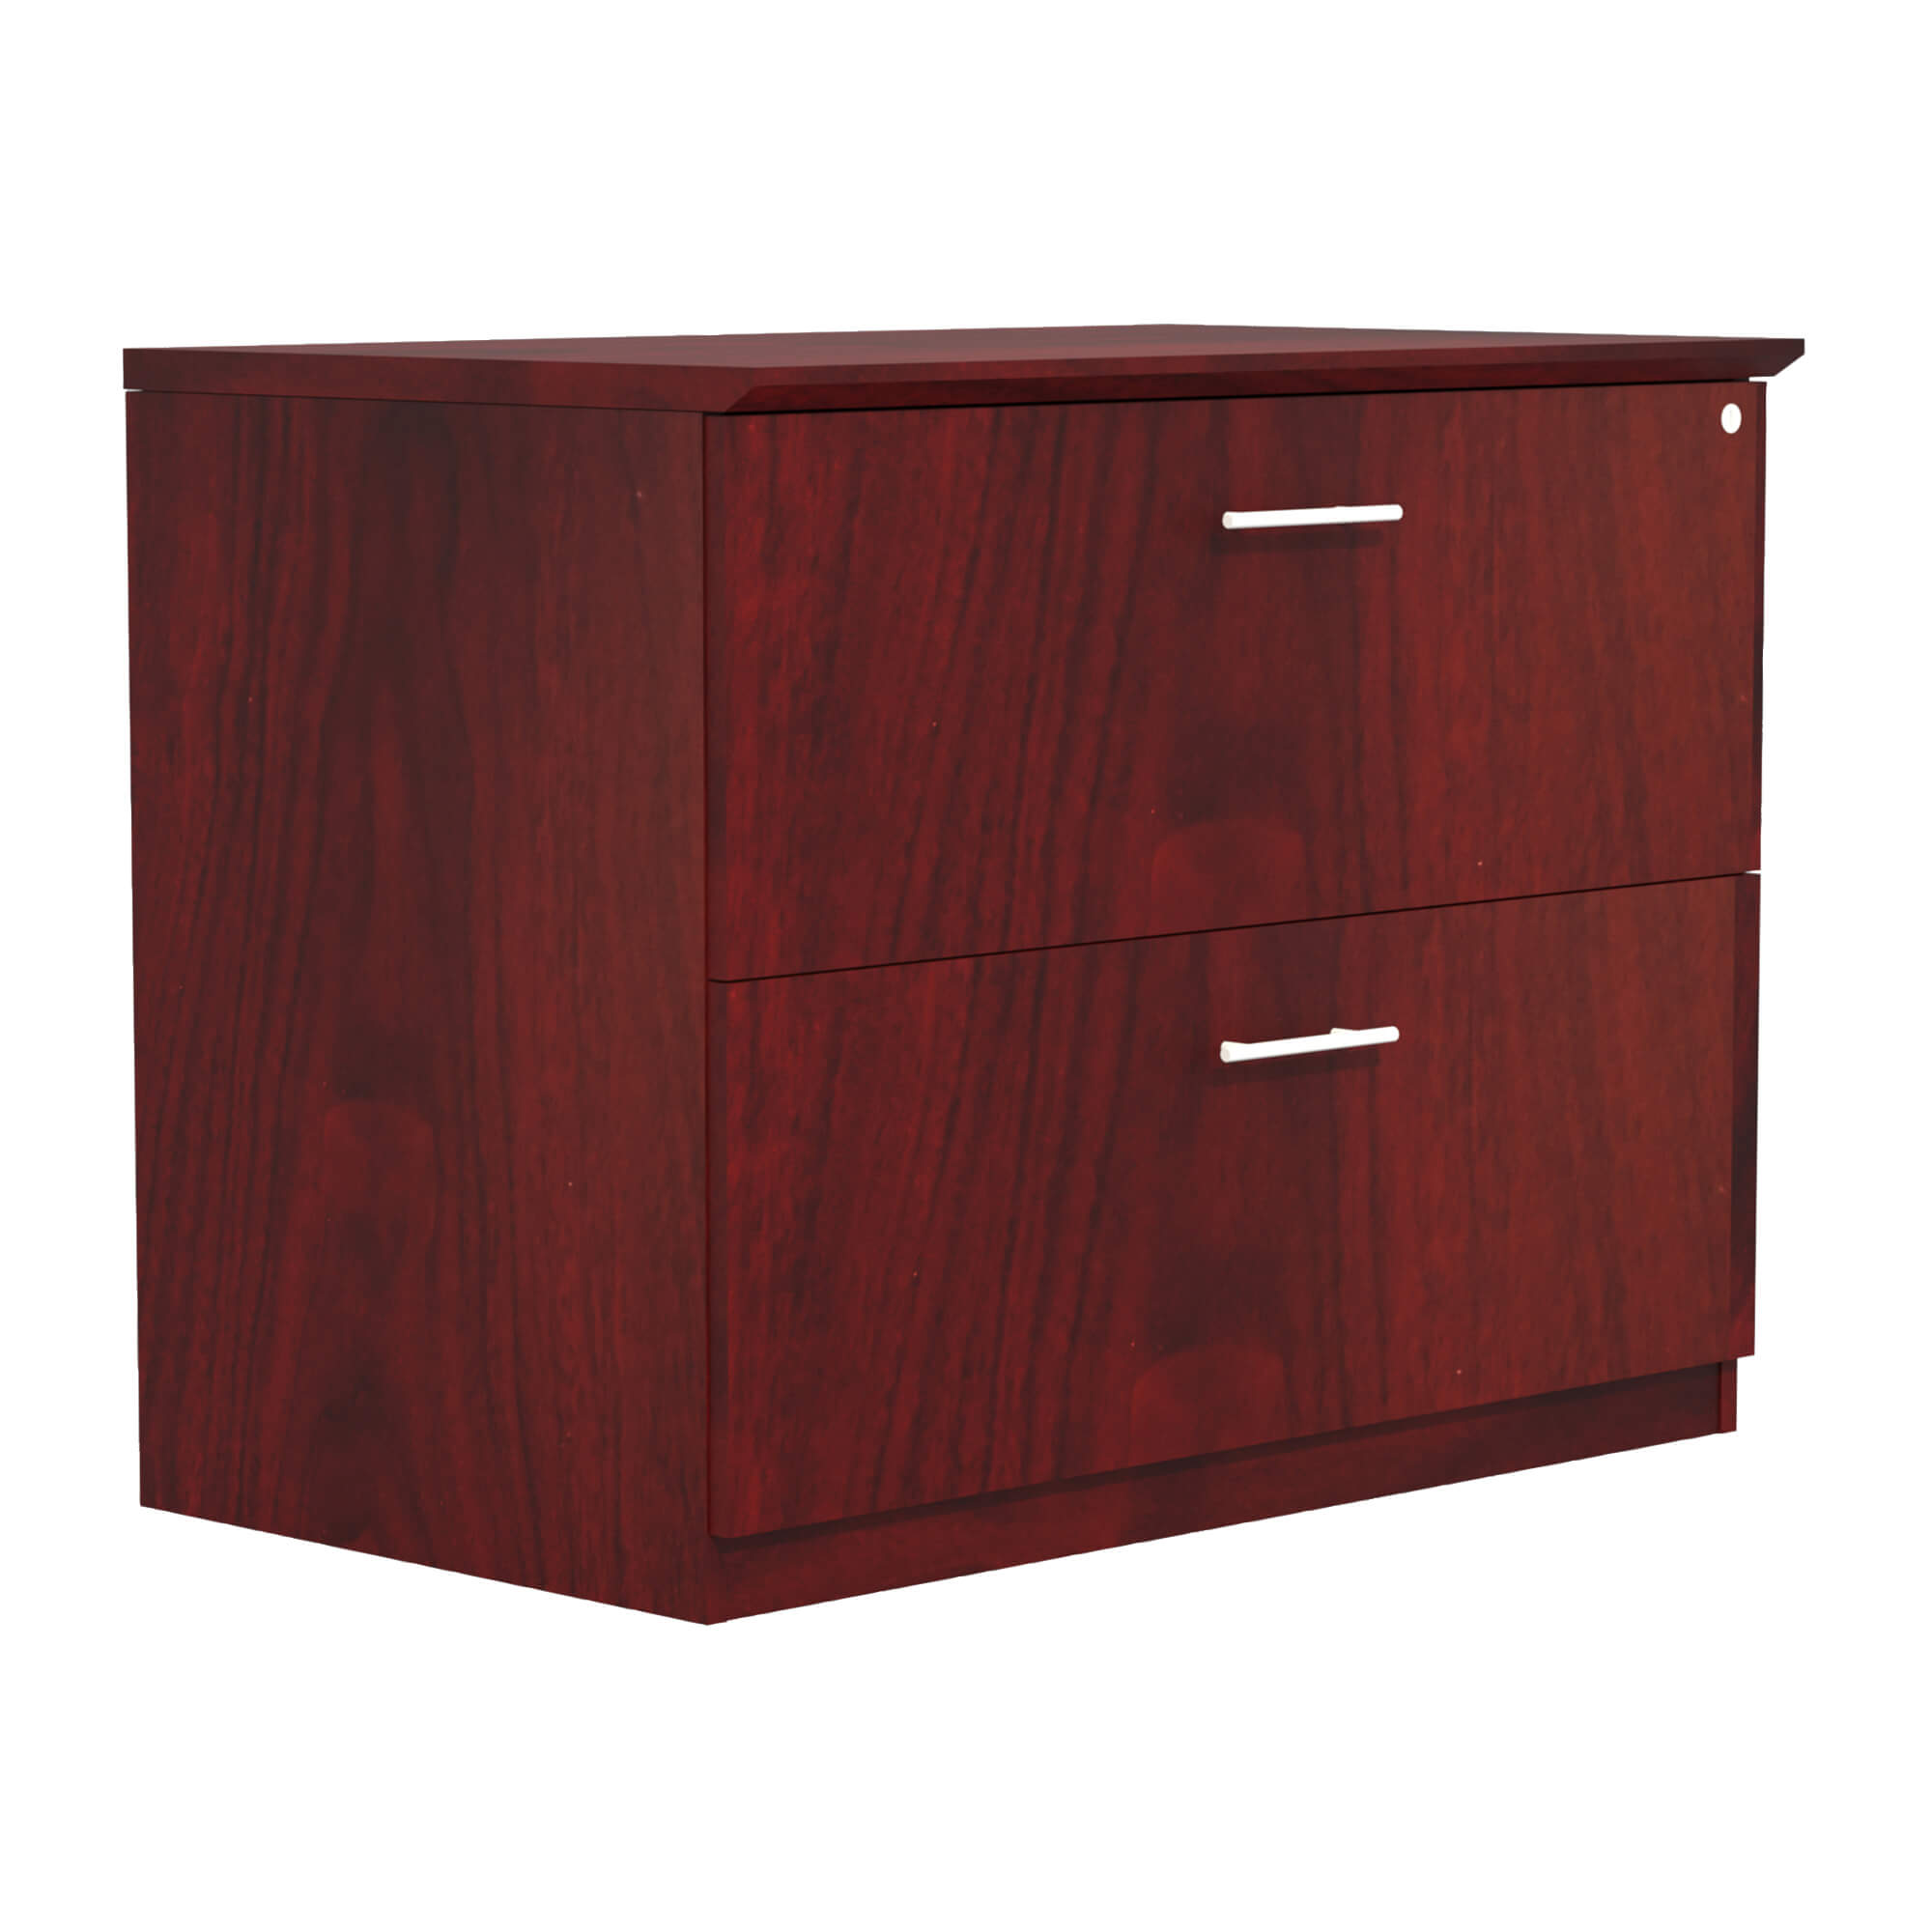 Conference room storage and accessories CUB MVLFLMH FAS